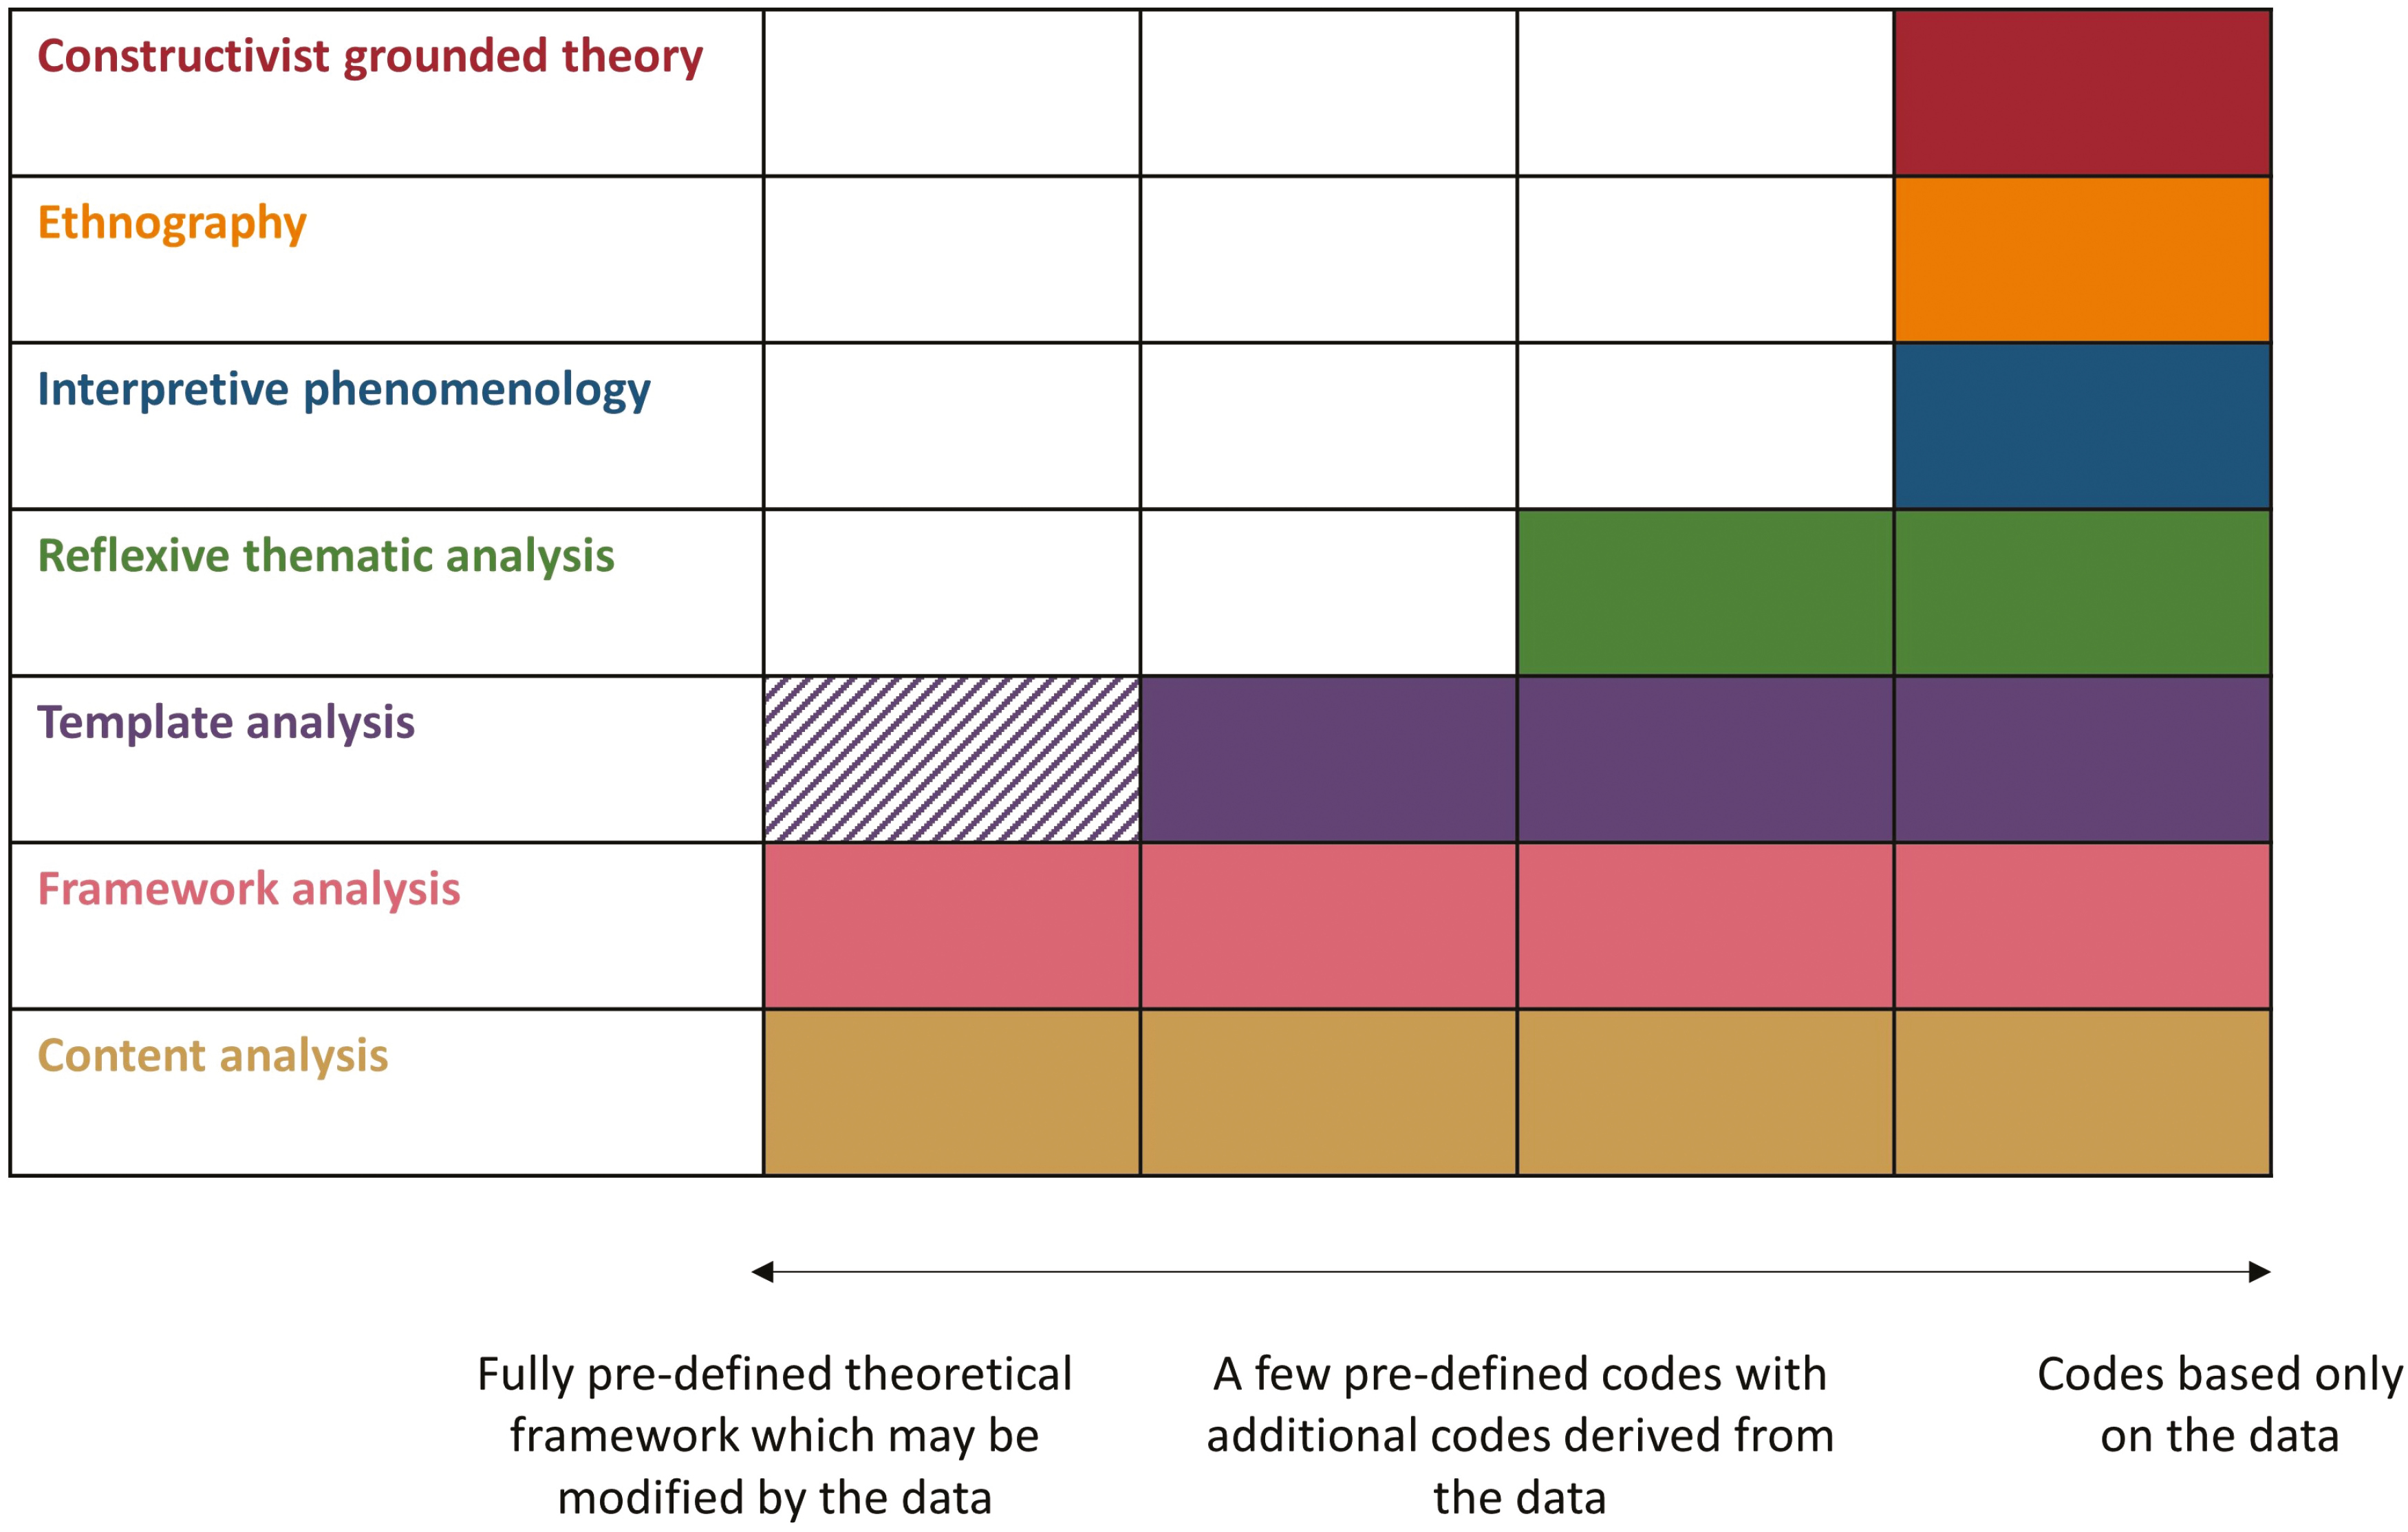 The extent to which methods and methodologies used within simulation-based research allow for the use of pre-defined codes. In template analysis, the original description suggests that use of a few a priori codes is justified, but within SBR and medical education research there are many examples where researchers use a fully pre-defined theoretical framework. This common usage, beyond the original description, is depicted by the striped portion.